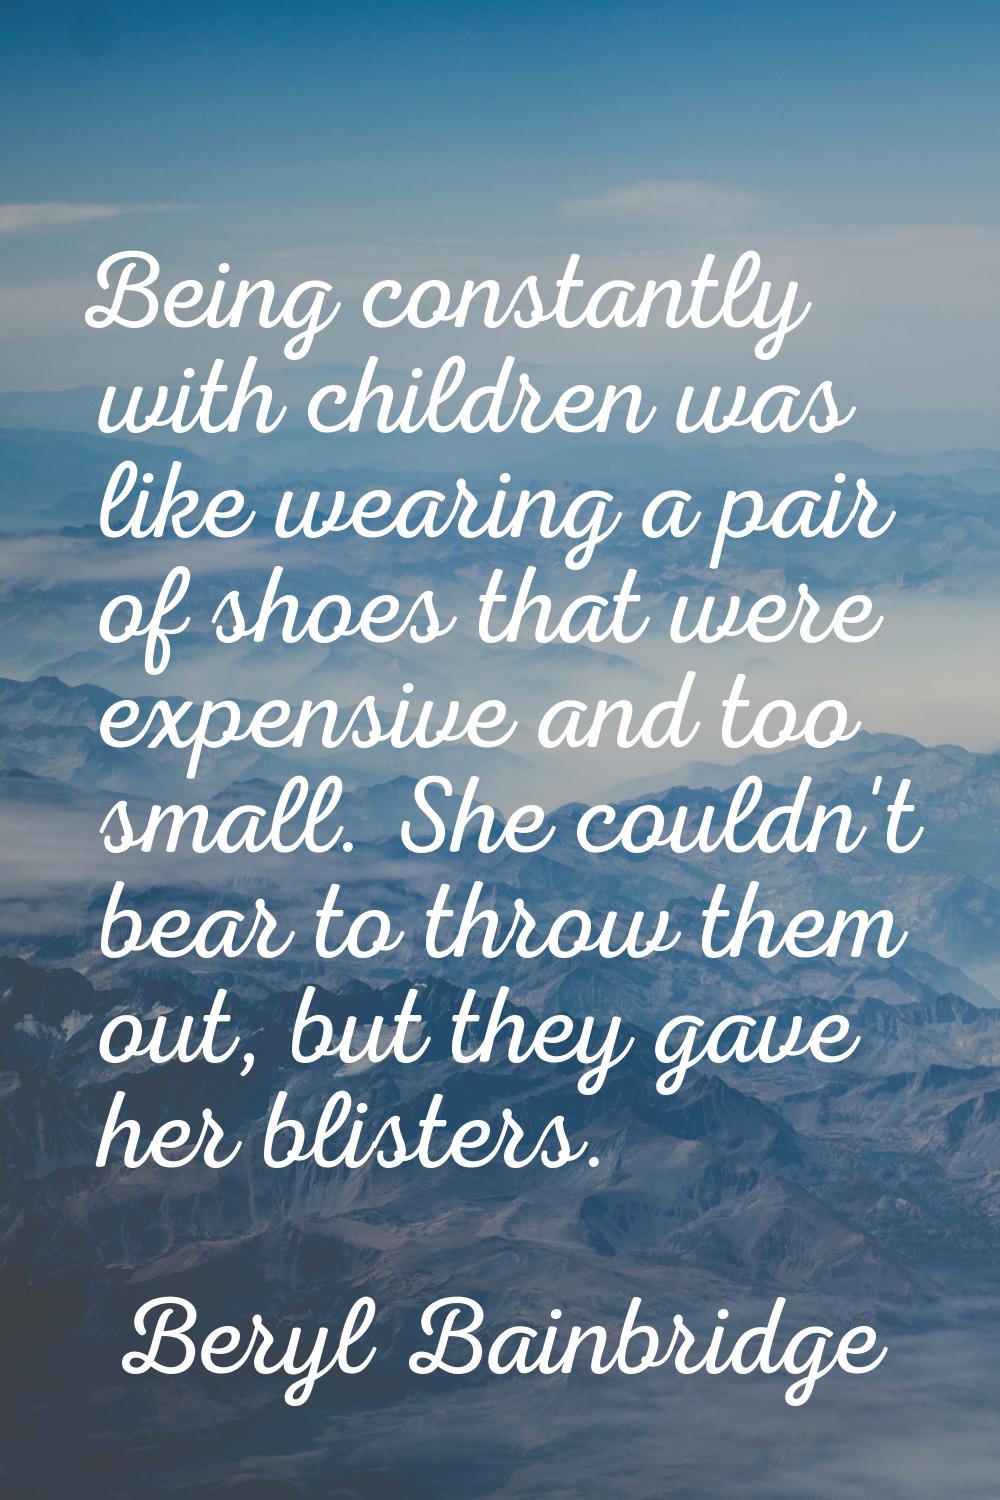 Being constantly with children was like wearing a pair of shoes that were expensive and too small. 